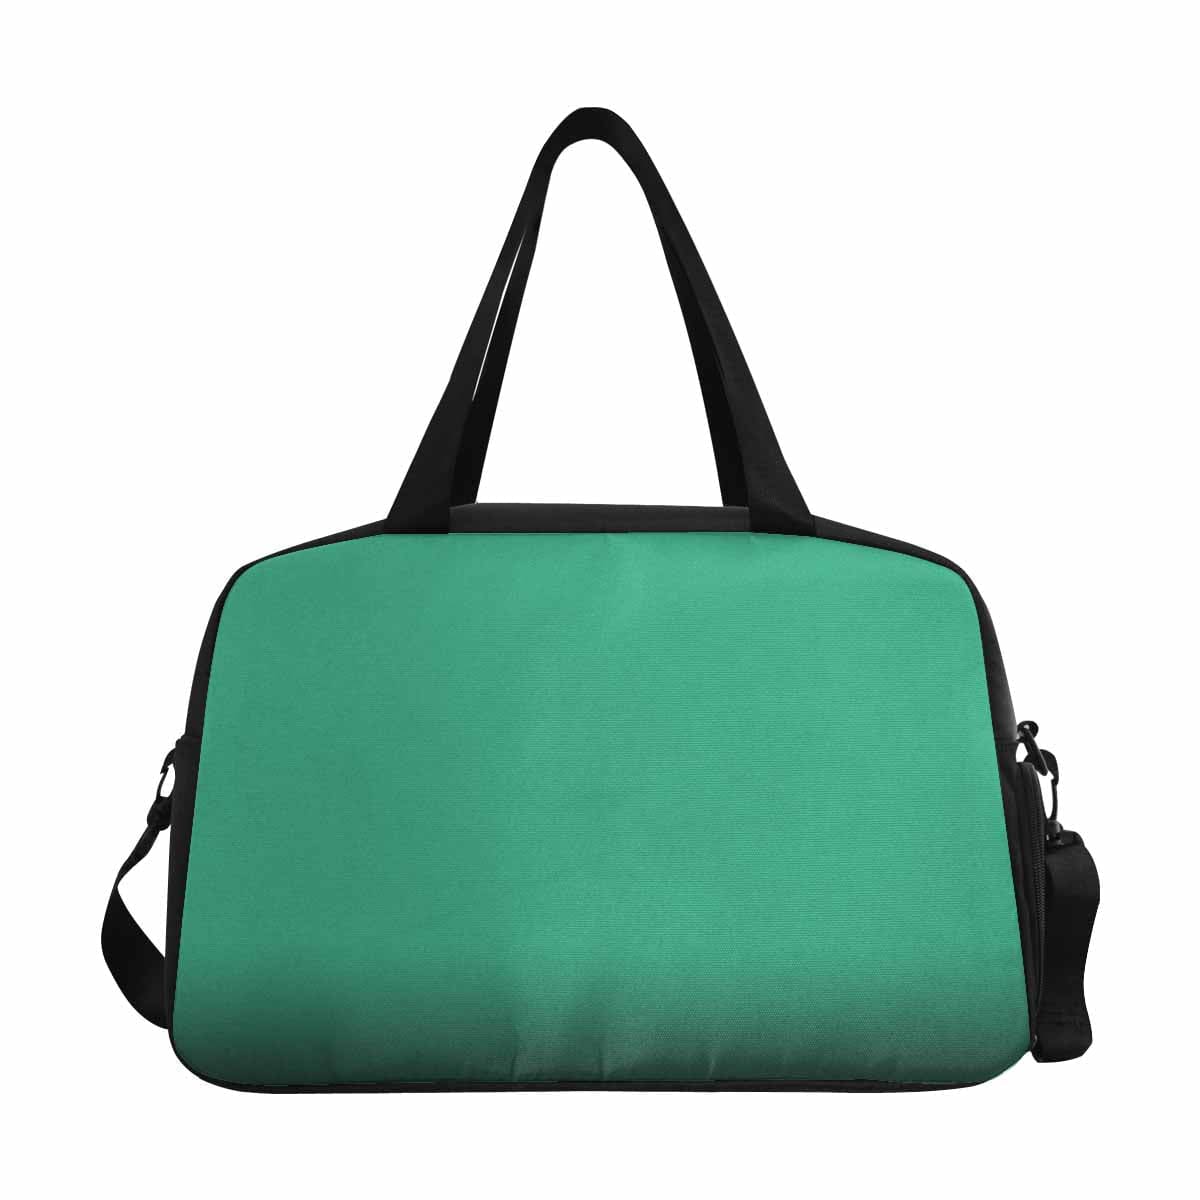 Mint Green Tote And Crossbody Travel Bag - Bags | Travel Bags | Crossbody